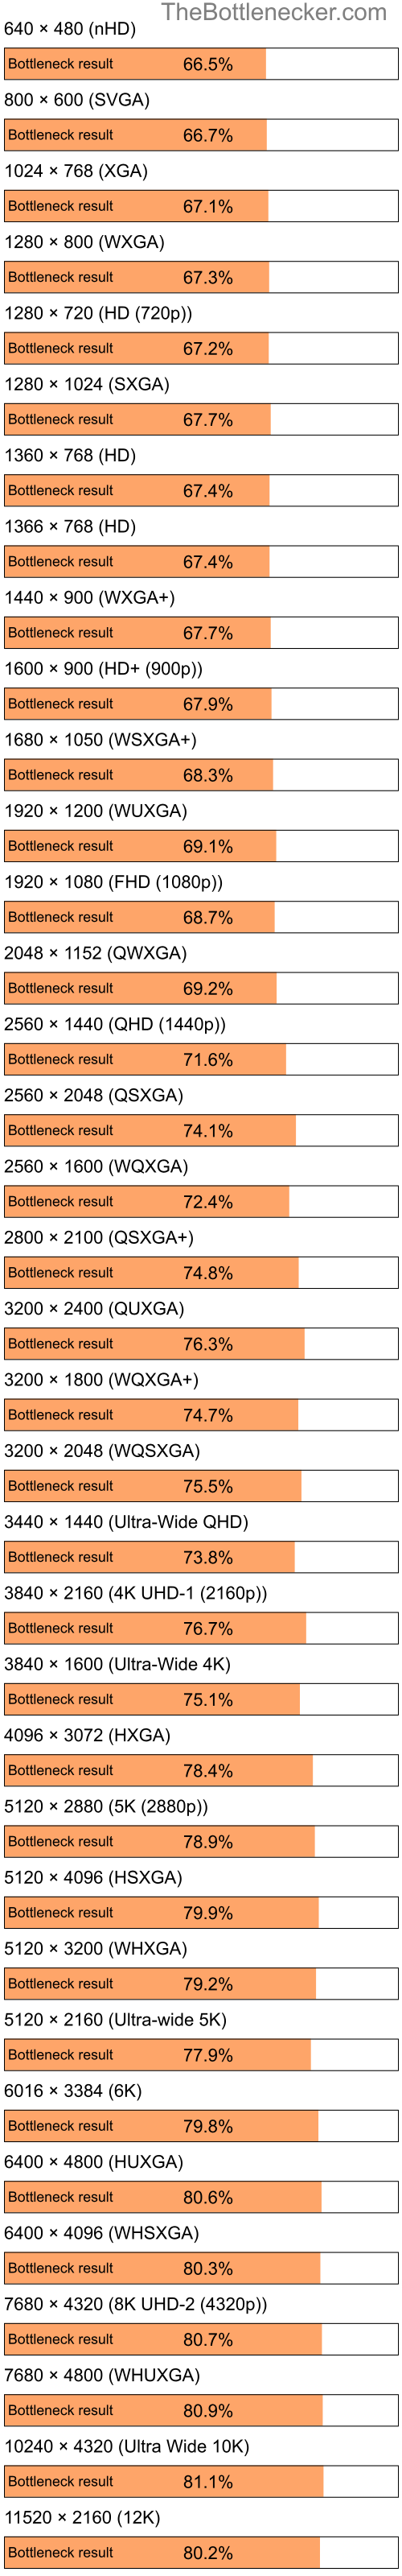 Bottleneck results by resolution for Intel Pentium 4 and NVIDIA GeForce G 105M in General Tasks